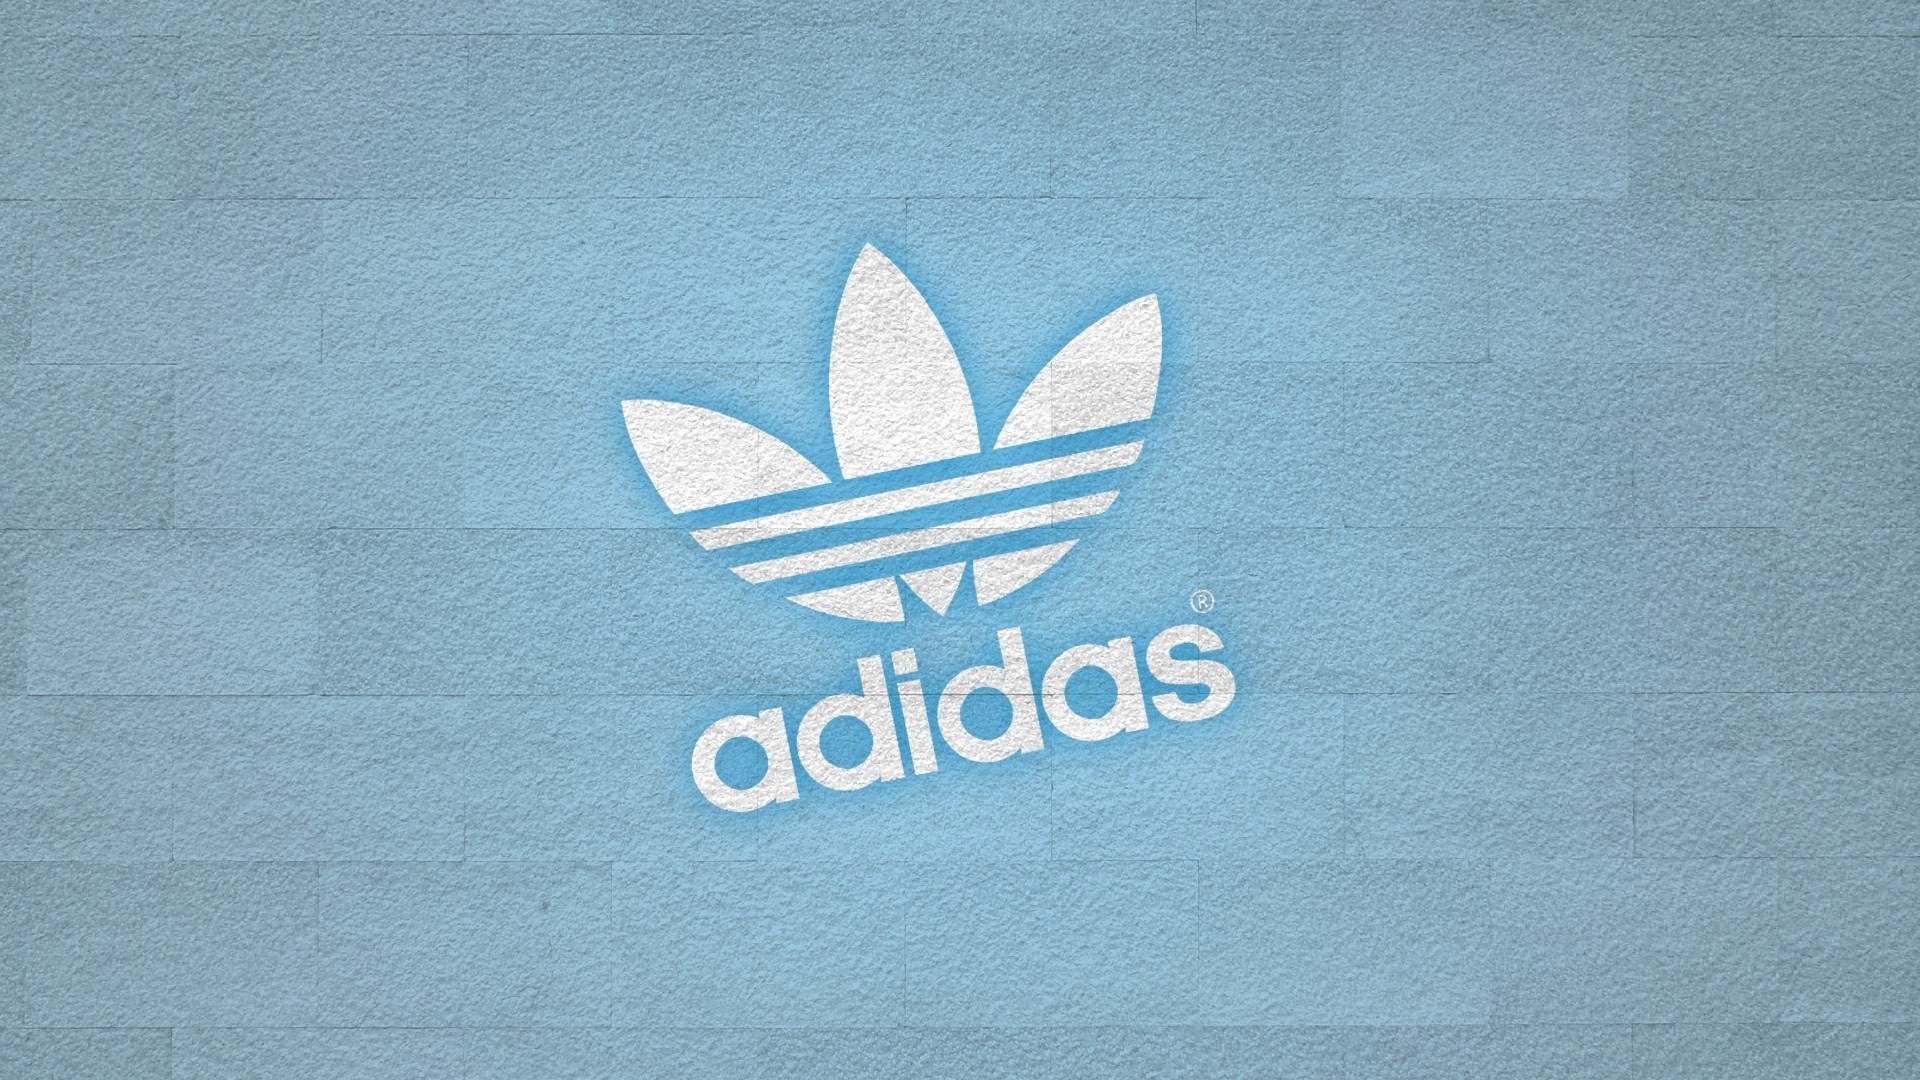 1920x1080 adidas wallpaper hd images download hd wallpapers desktop images download  free windows wallpapers colourful 4k picture